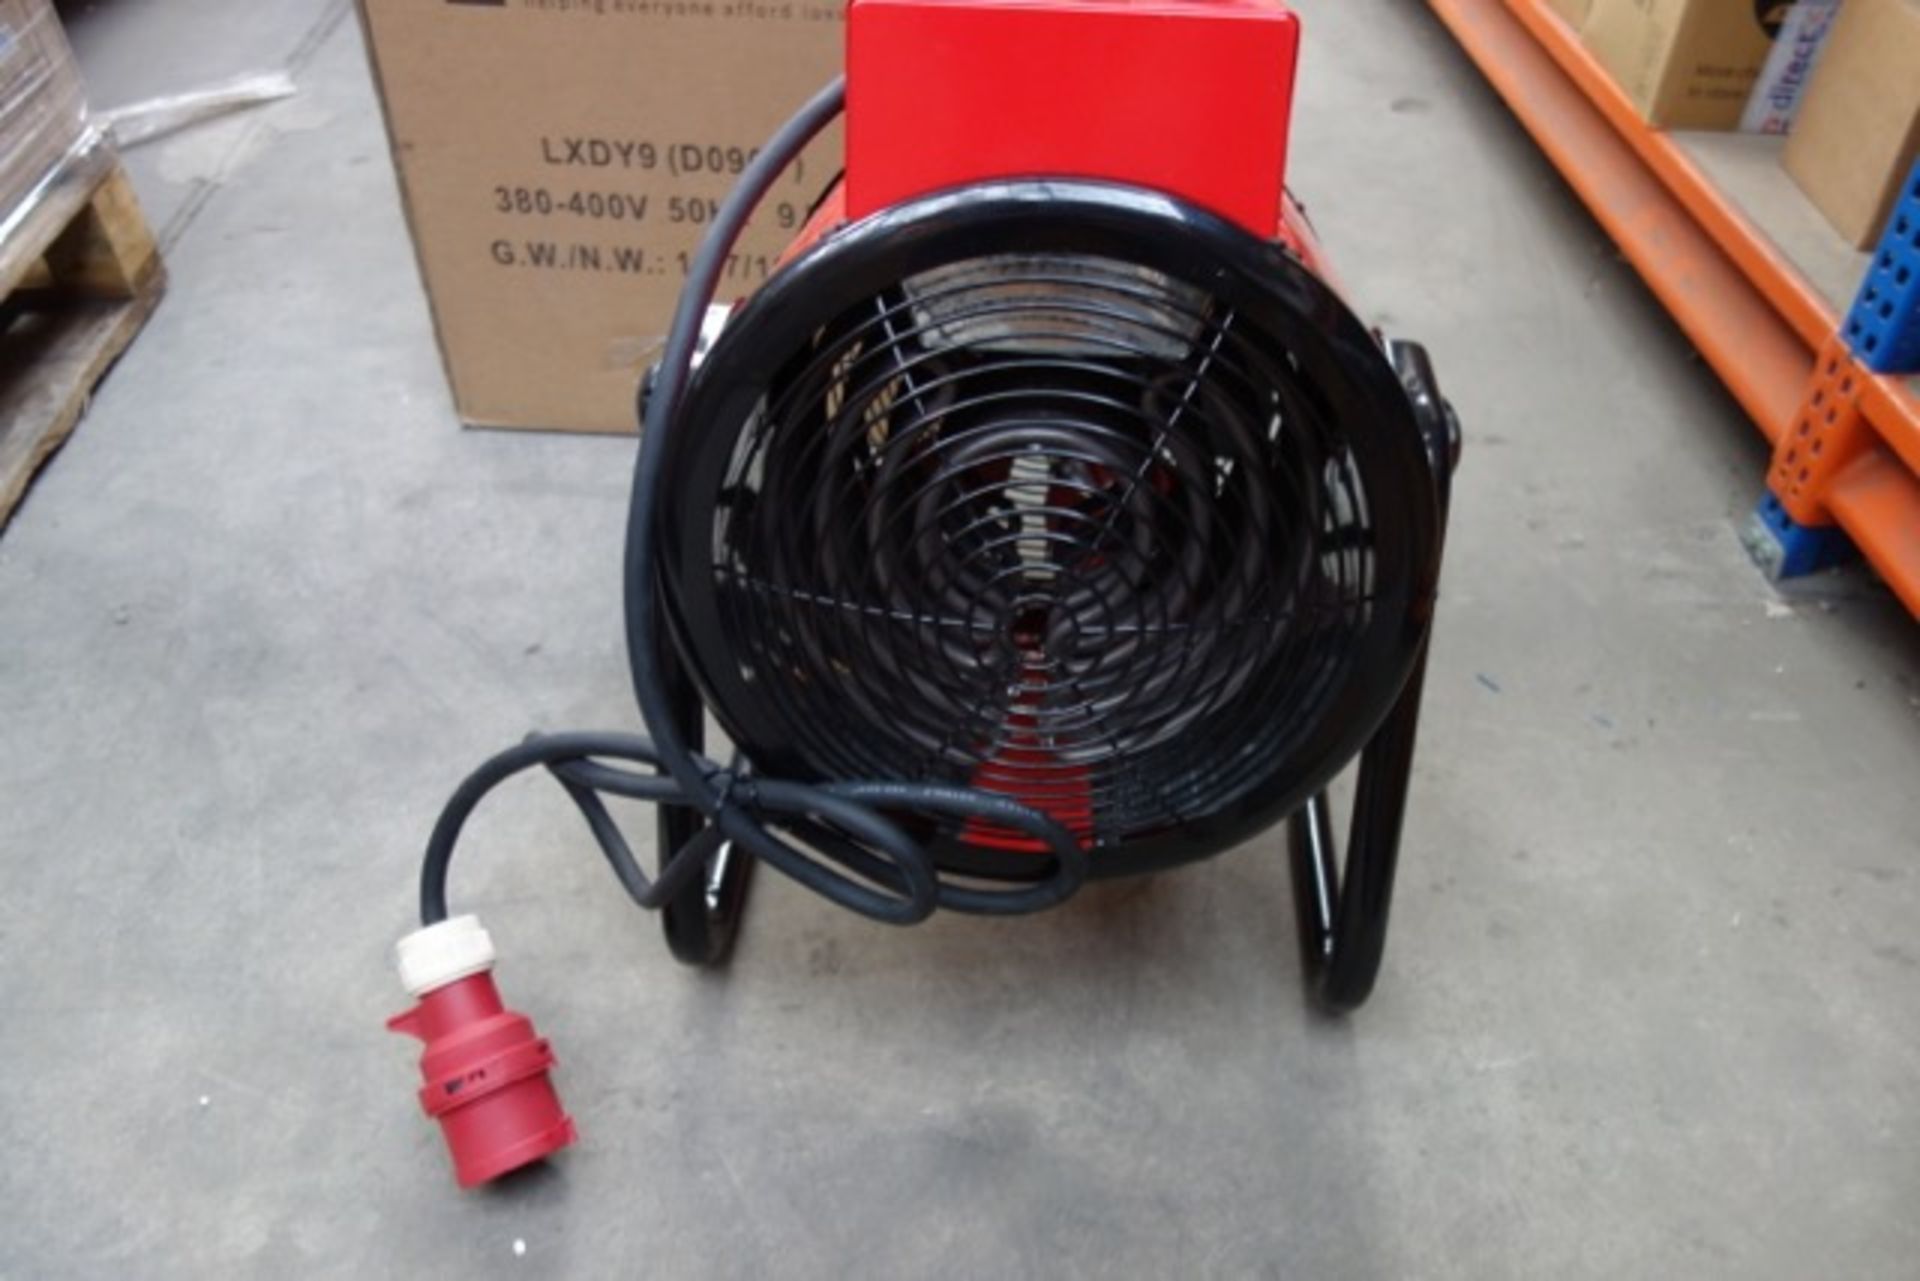 1 x 9KW Industial Fan Heater. 380-400v-50Hz 9KW. Very high heat output. RRP £299.99. - Image 2 of 2